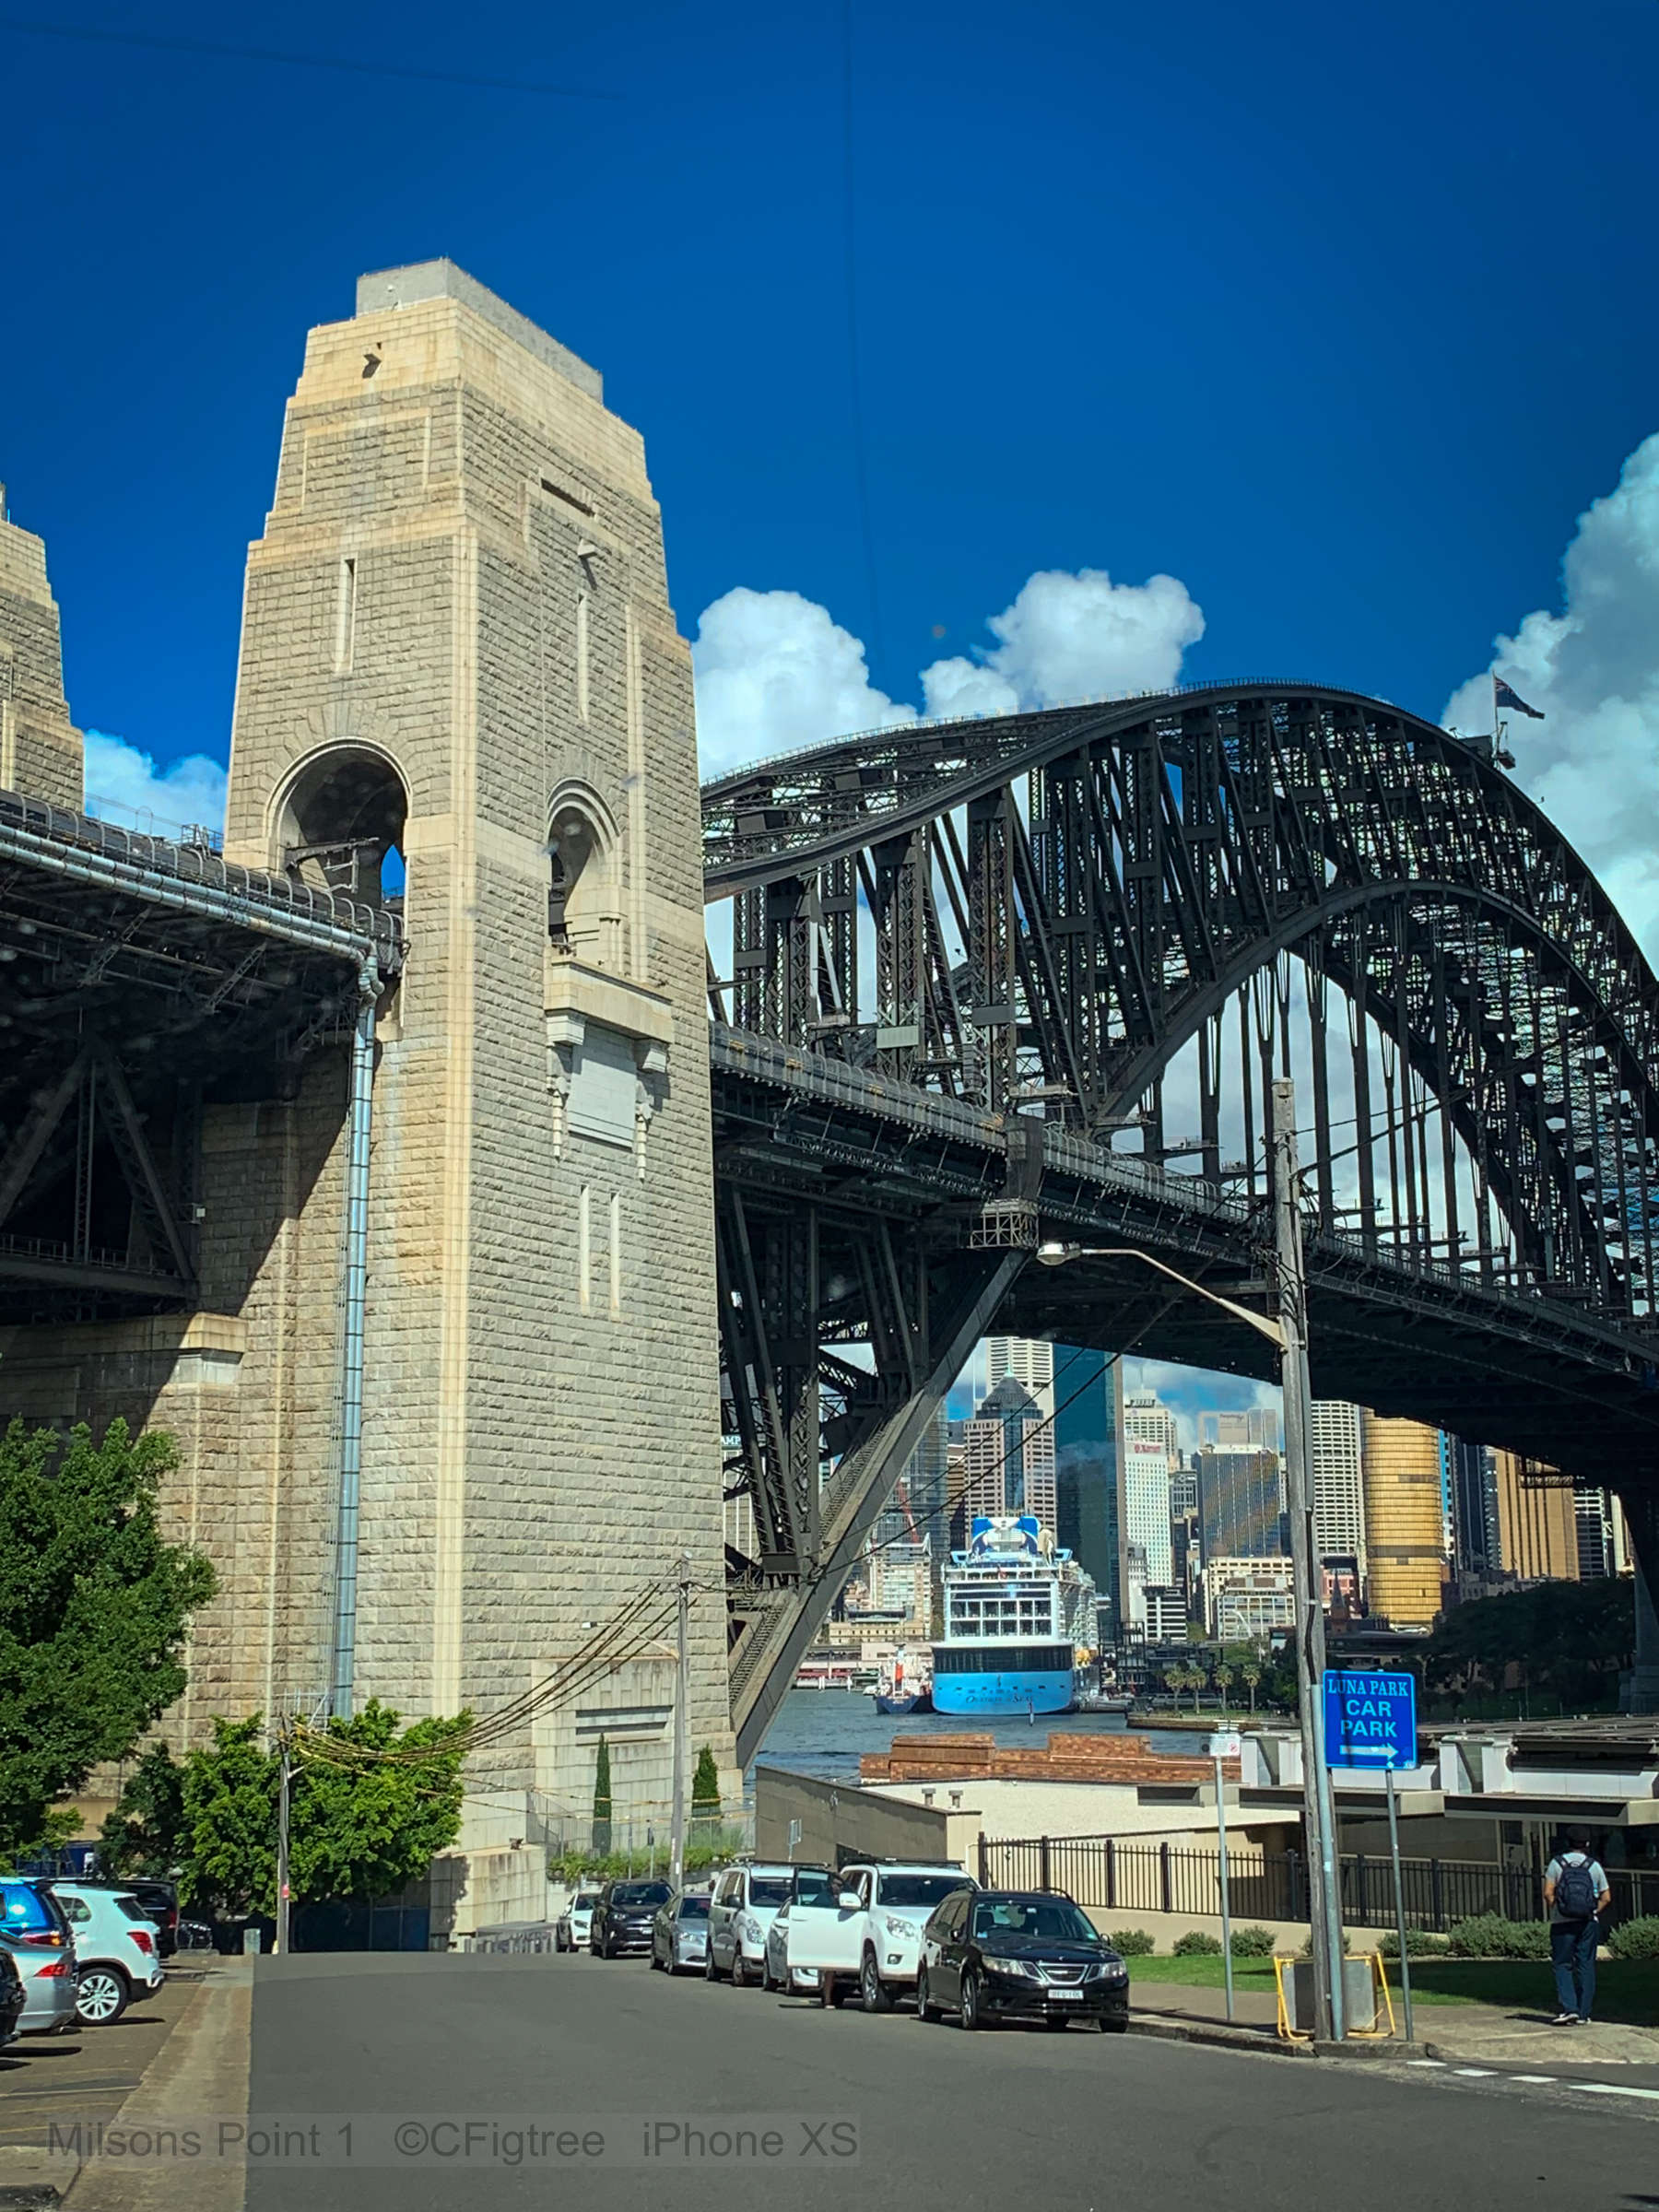 Sydney Private Half Day Tour (4 or 6 hours)